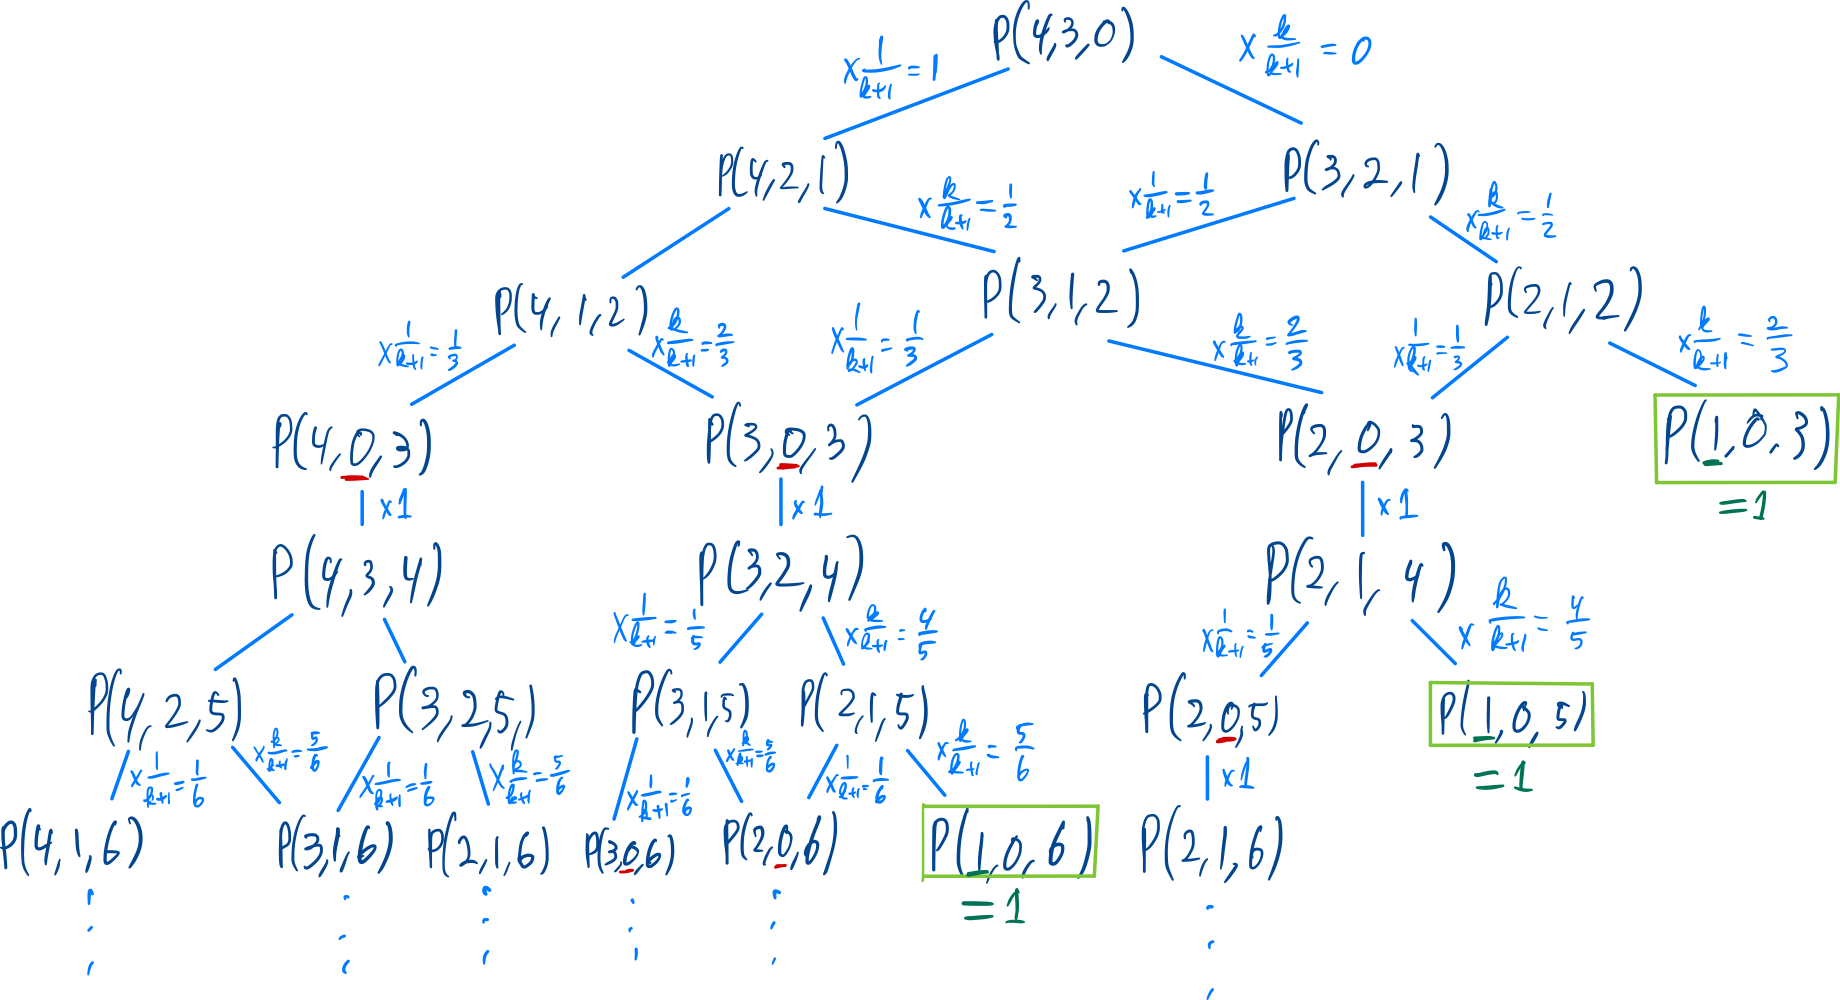 a diagram showing the tree structure of the DP formula above